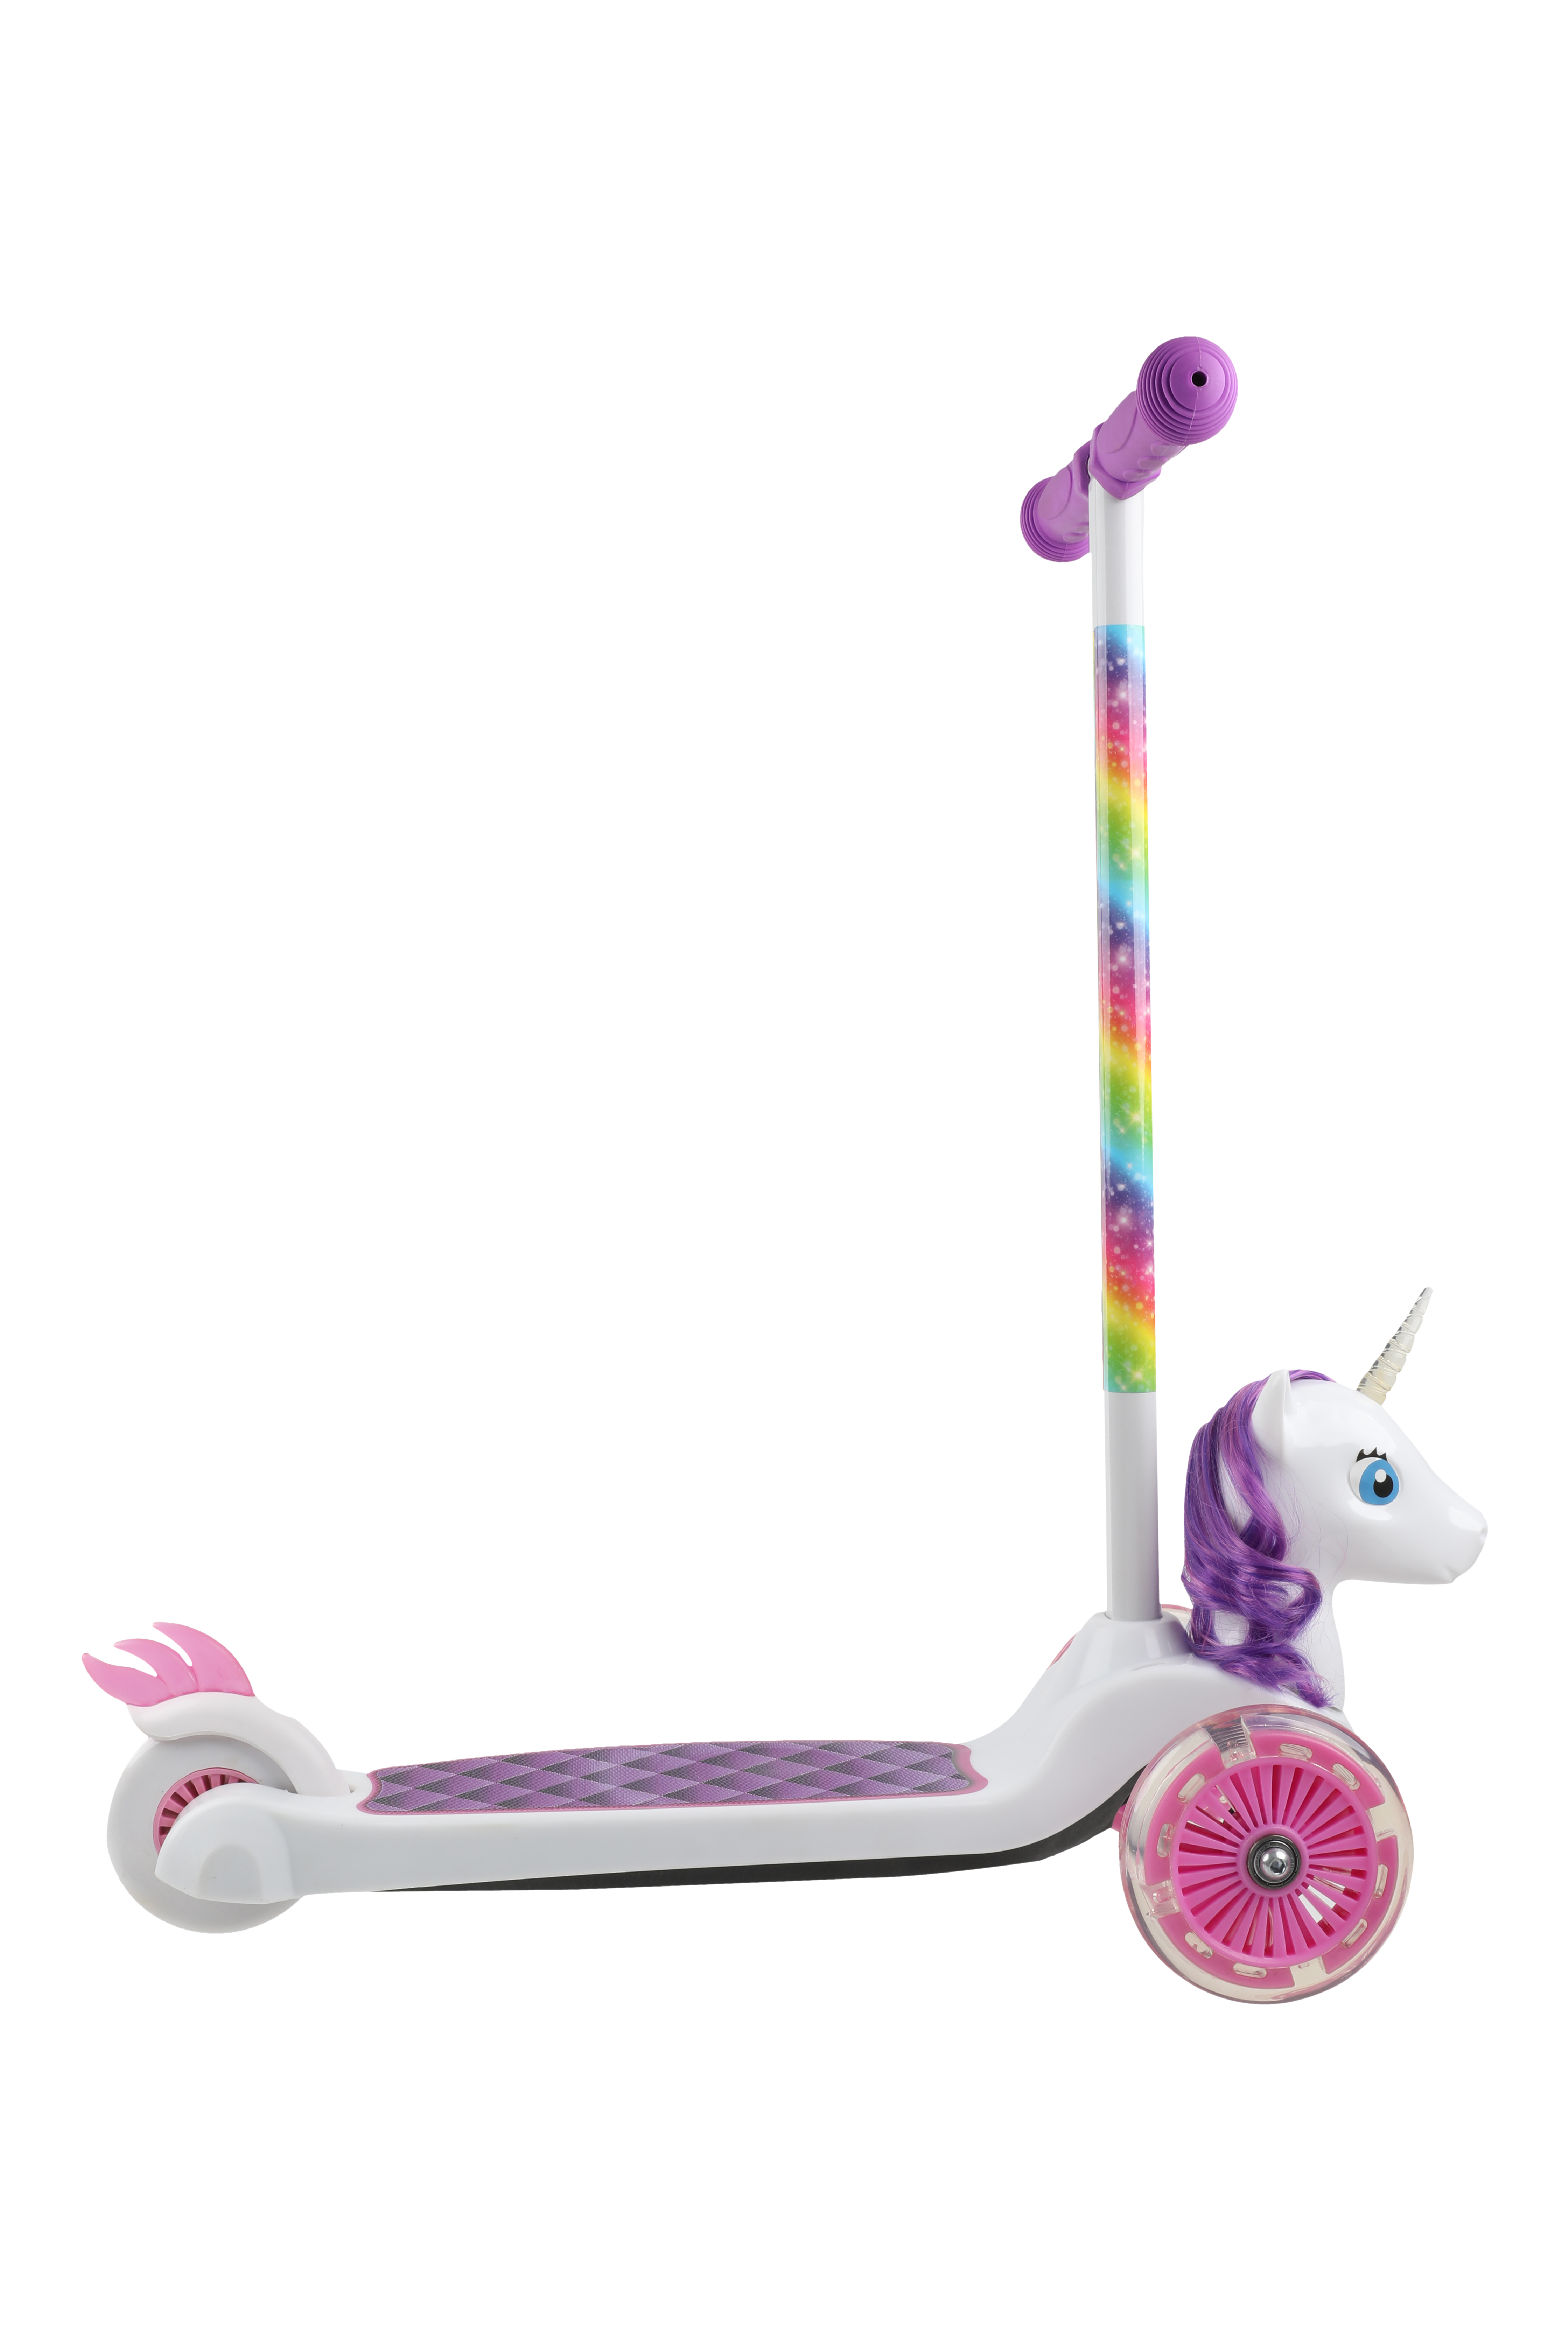 Dimensions Unicorn 3D Scooter with Light Up Wheels, Ages 3+, Max Weight 75lbs, Tilt and Turn Steering, 3-wheel Platform, Foot-Activated Brakes - image 3 of 12